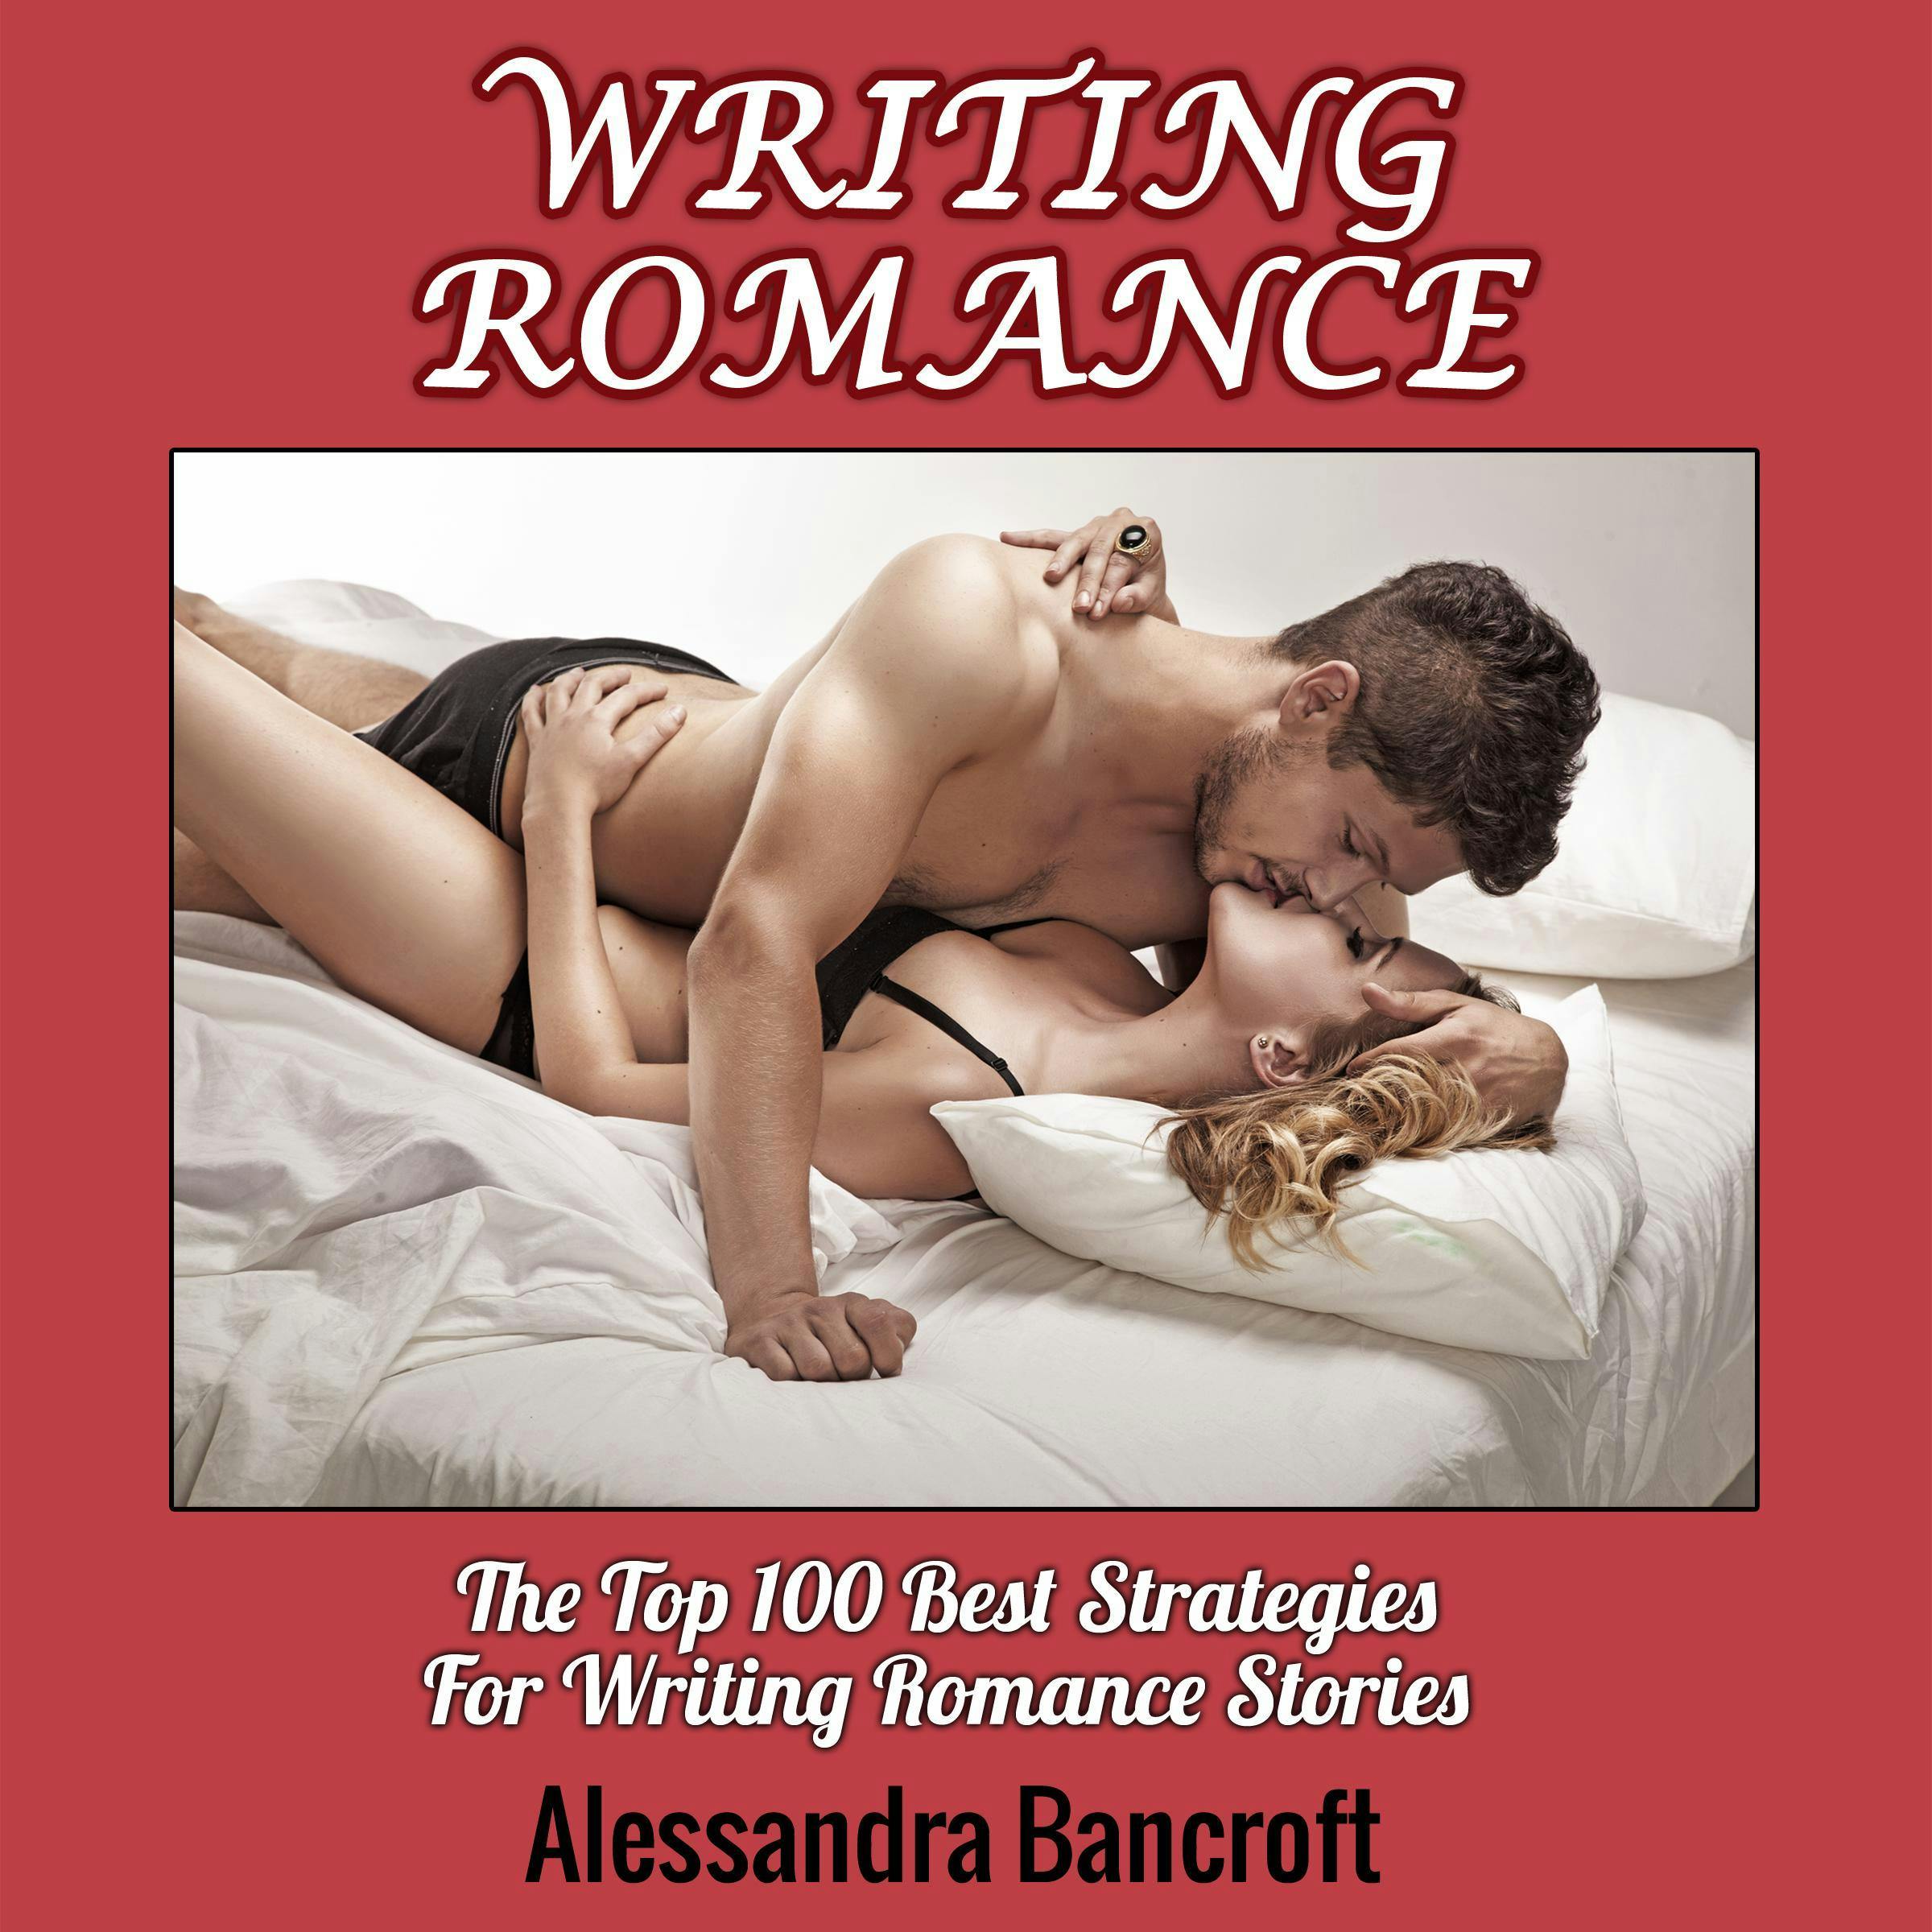 Writing Romance: The Top 100 Best Strategies For Writing Romance Stories - Alessandra Bancroft